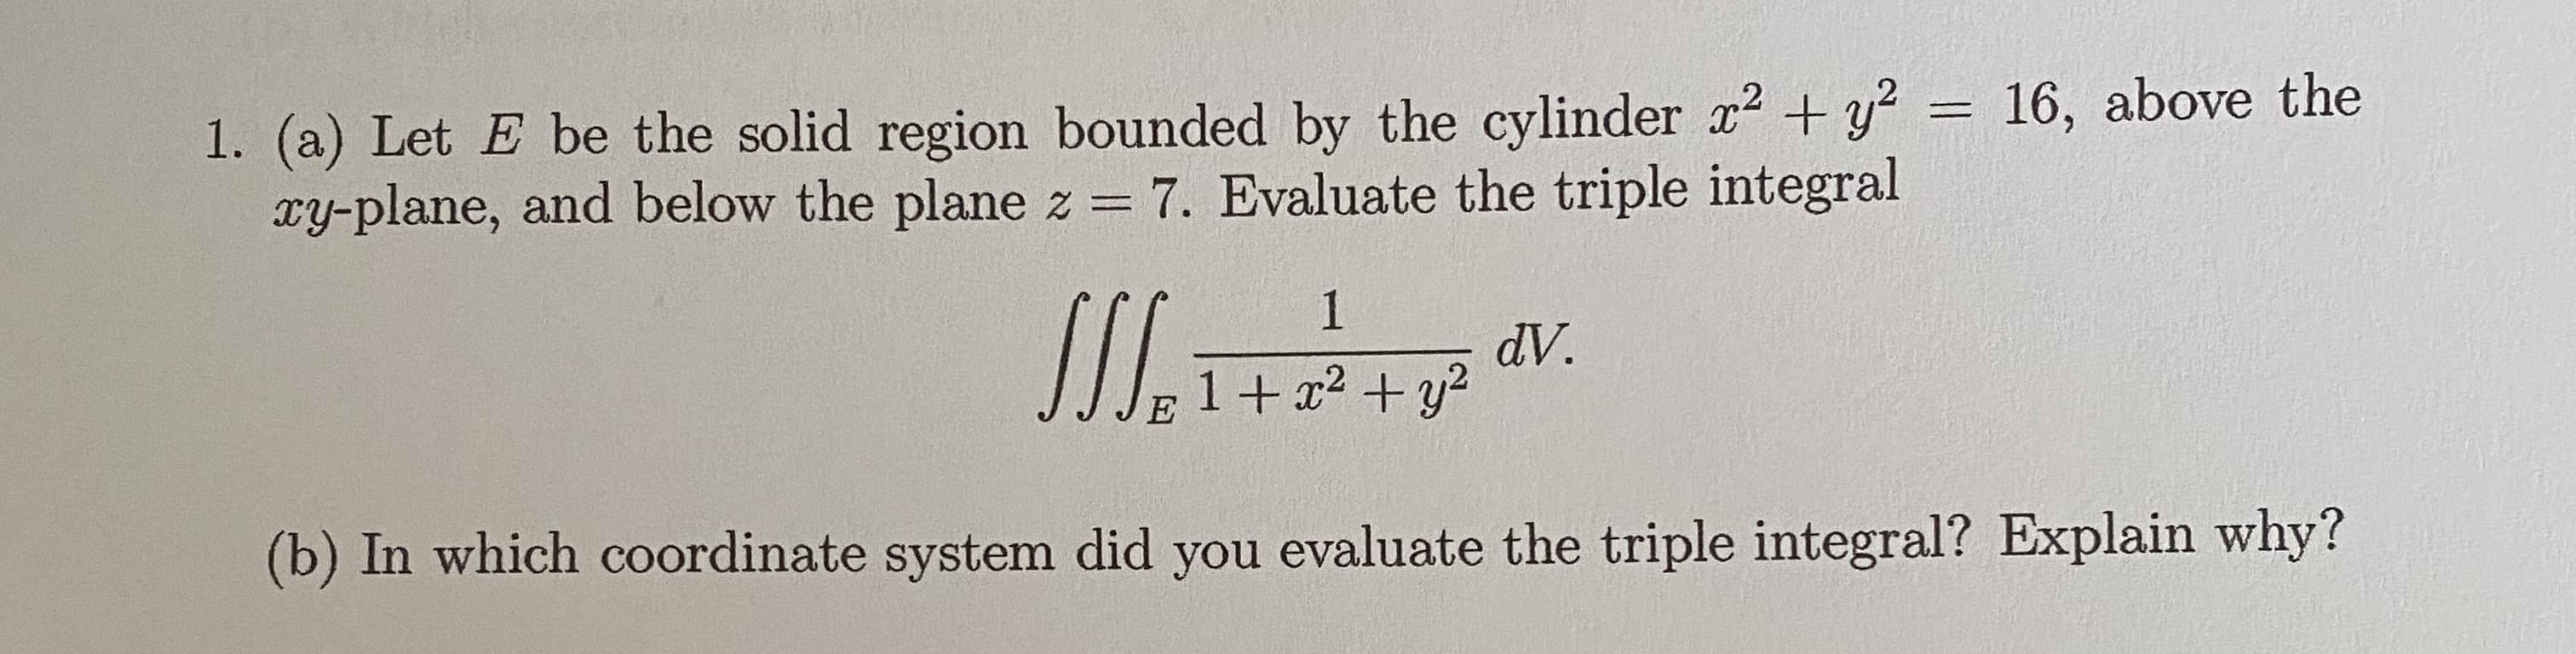 (a) Let E be the solid region bounded by the cylinder x + y
xy-plane, and below the plane z = 7. Evaluate the triple integral
16, abové the
%3D
dV.
1+ x2 +y2
b) In which coordinate system did you evaluate the triple integral? Explain why?
